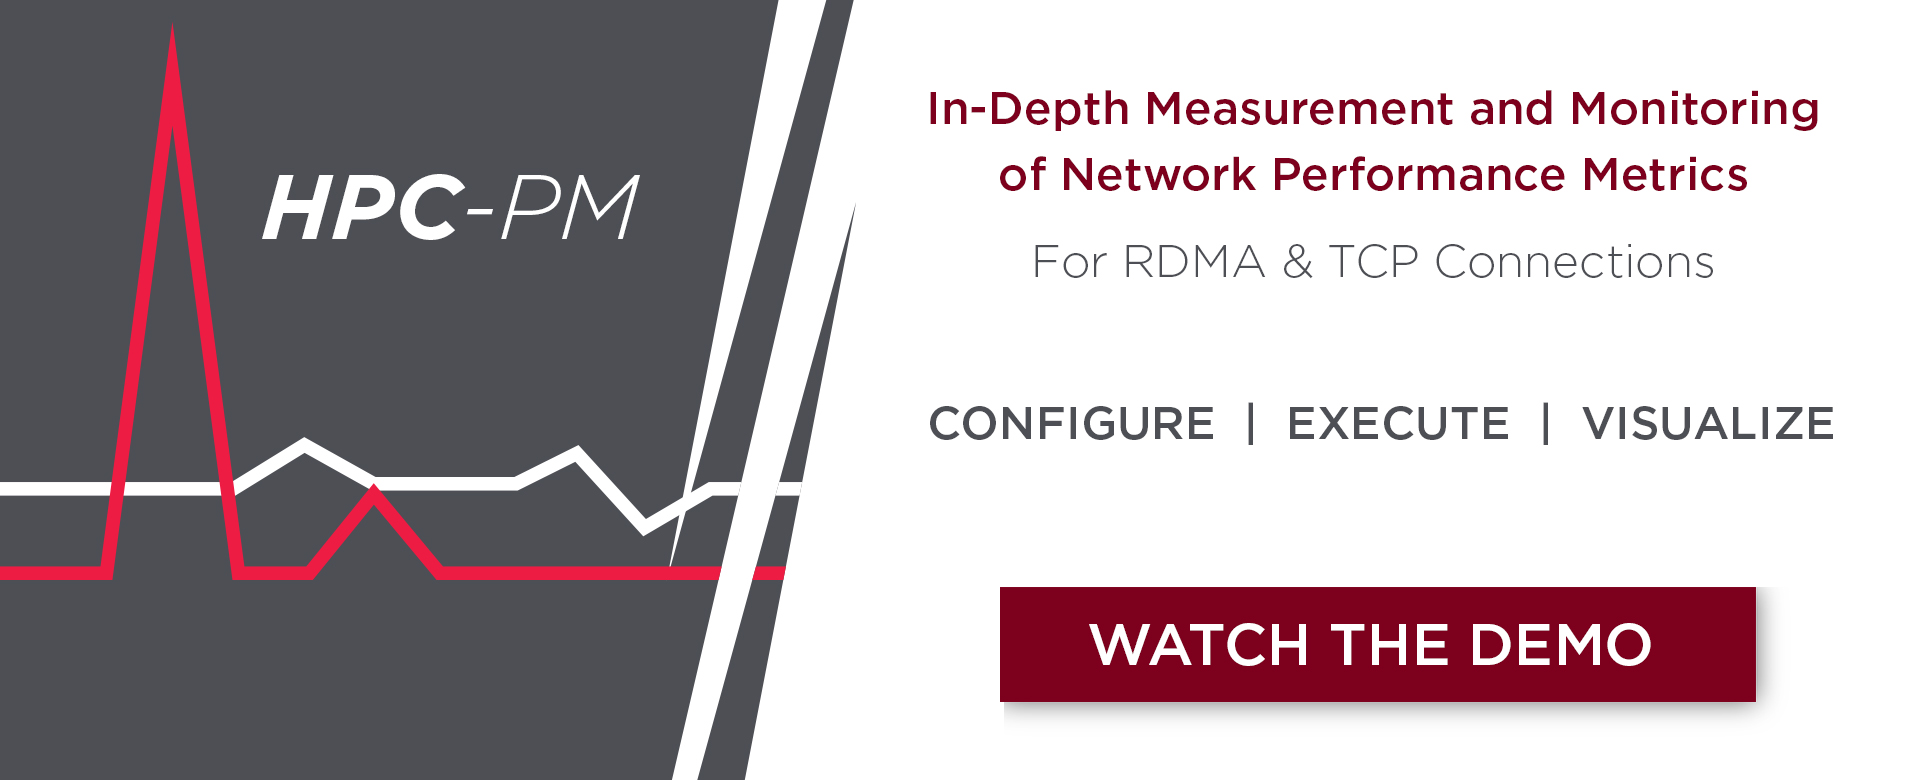 High Performance Computing Performance Monitor for RDMA and TCP Connections